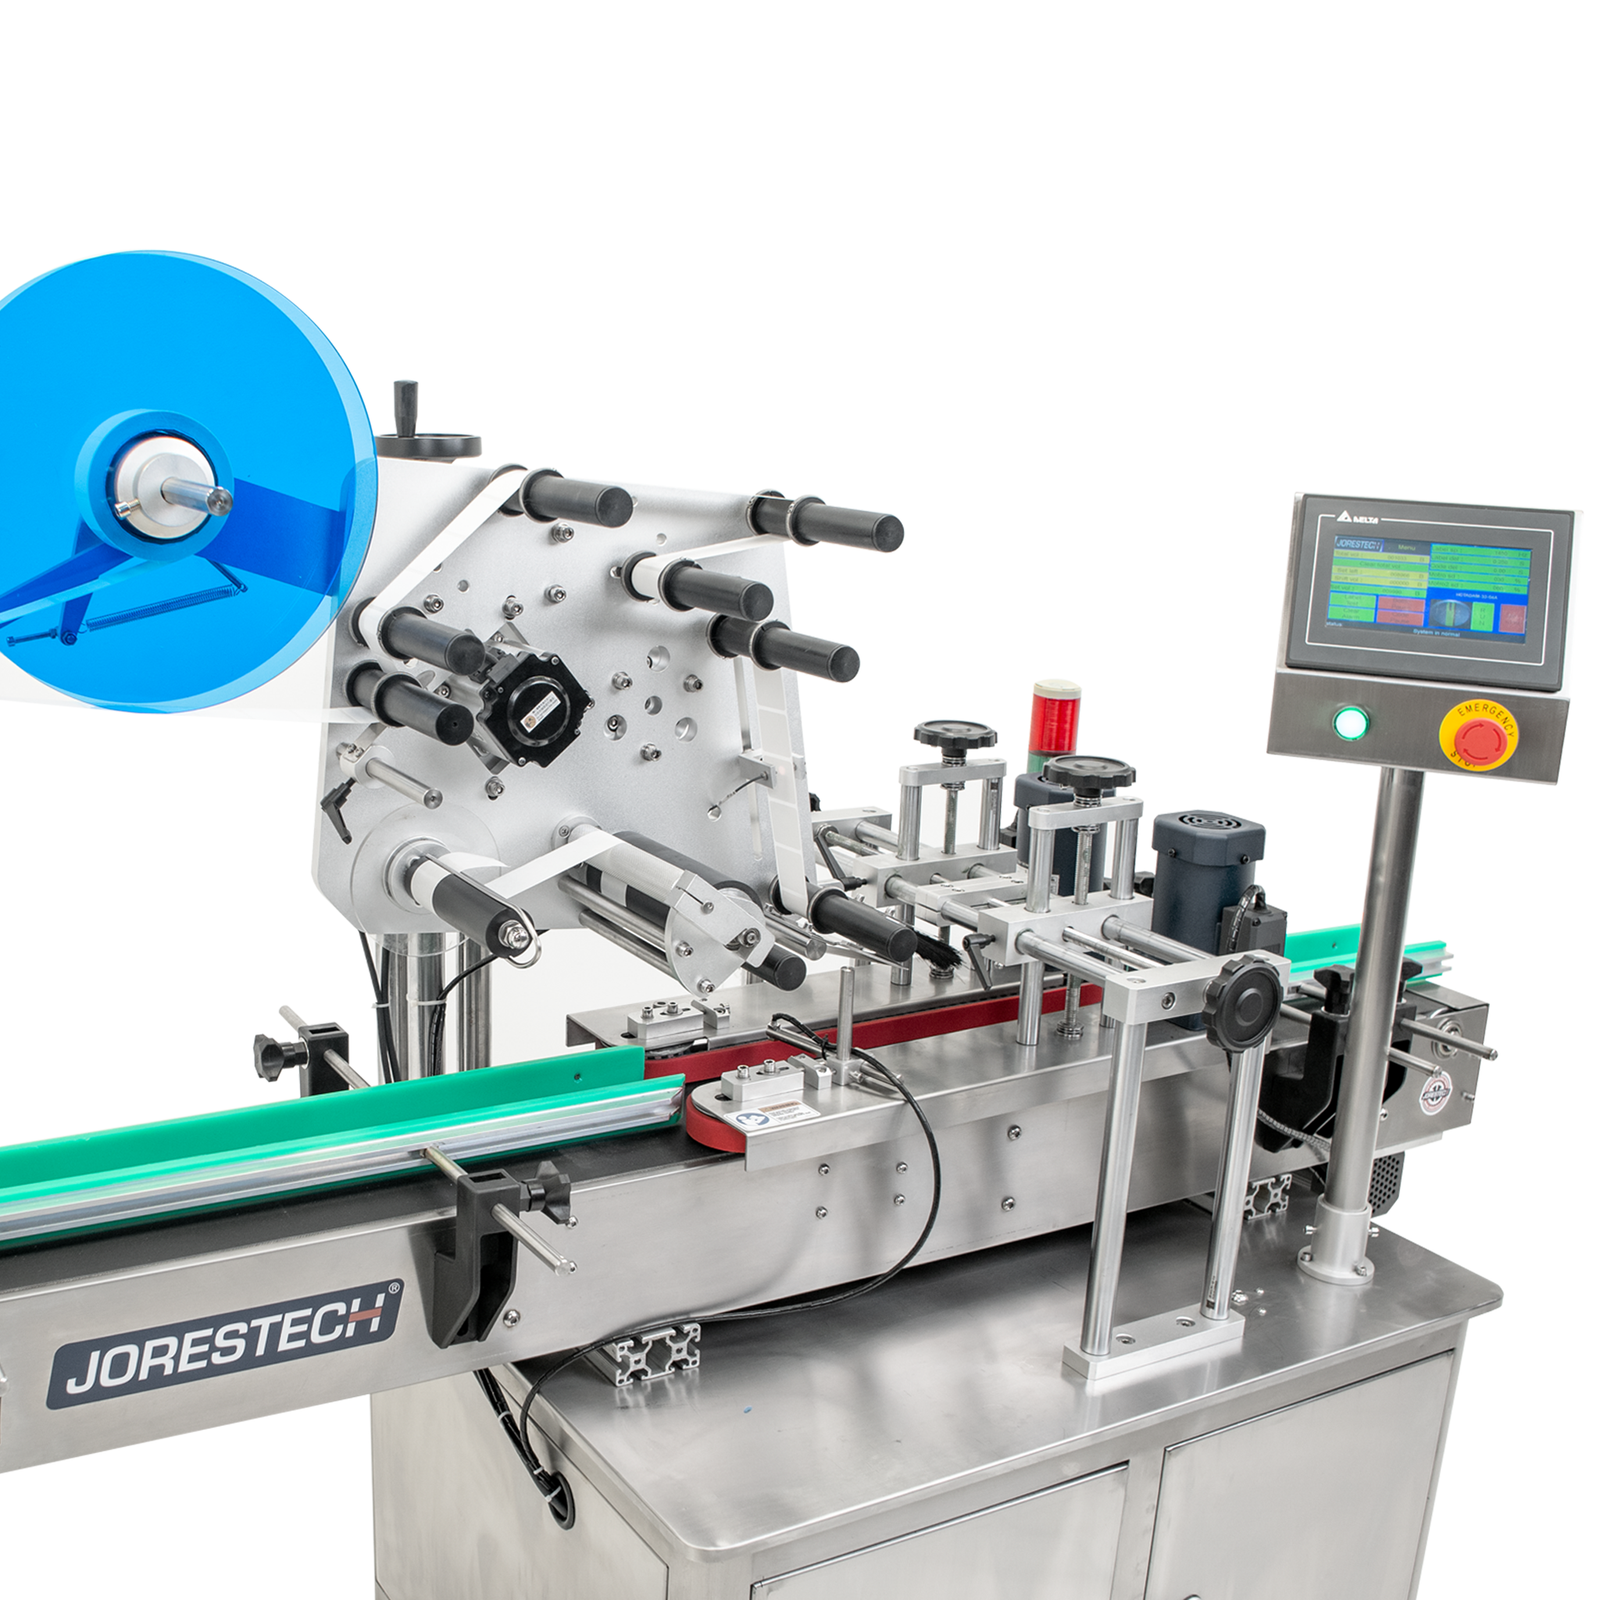 OMICRON 3 Automatic Labeler System - Pressure Sensitive Label Applicator  for Flat Containers – Technopack Corporation